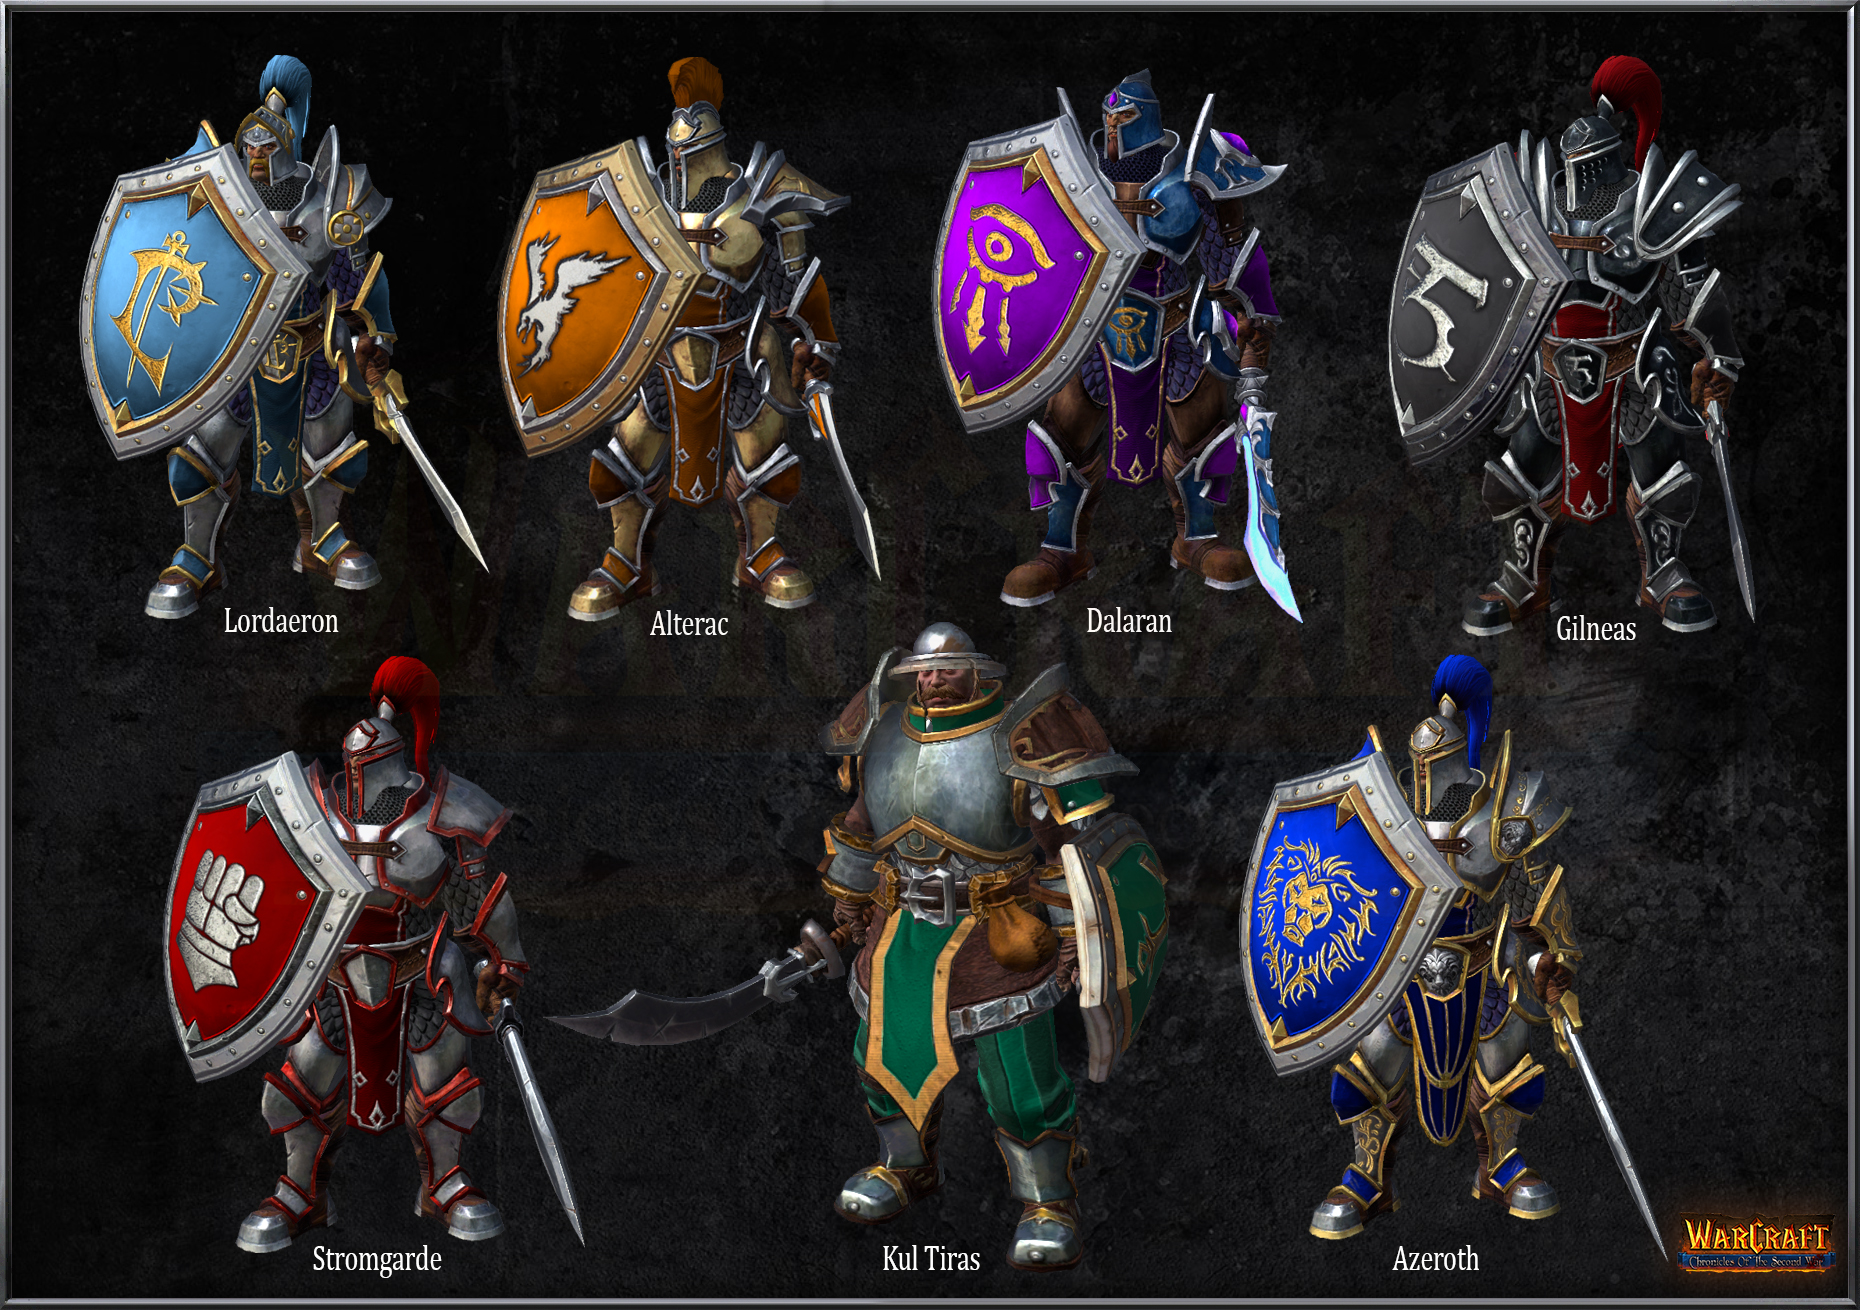 The Footmen of the Alliance